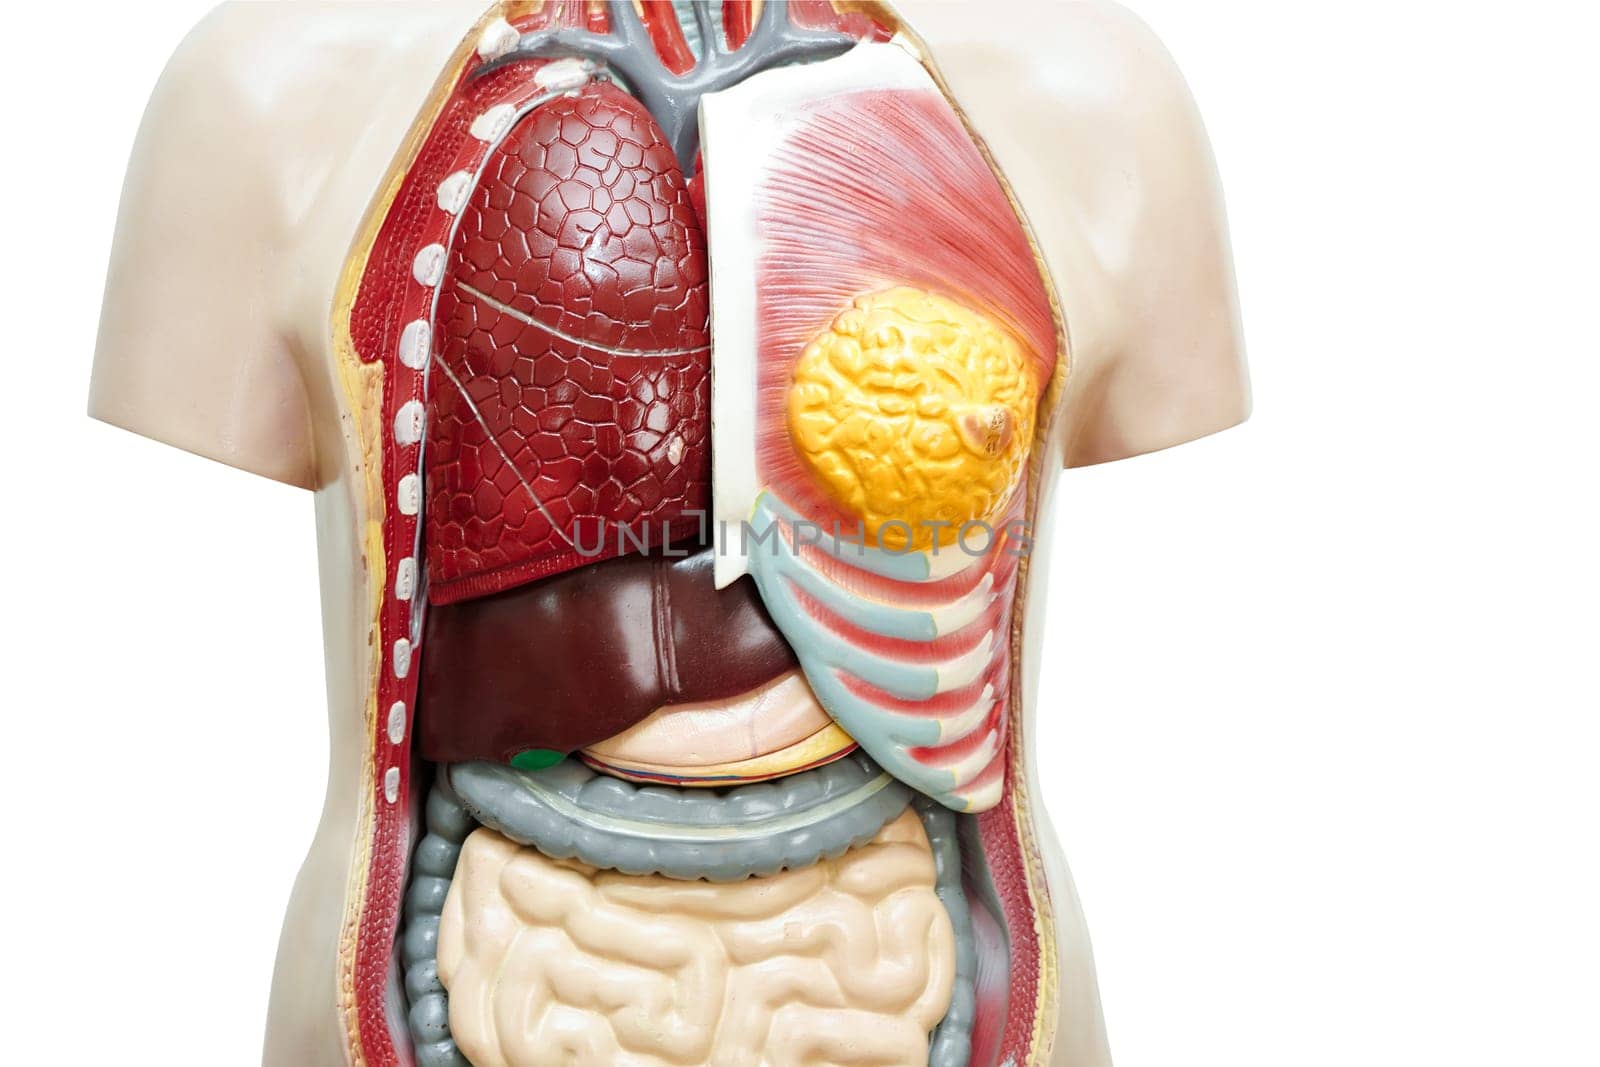 Human body anatomy organ model for study education medical course isolated on white background with clipping path. by sweettomato